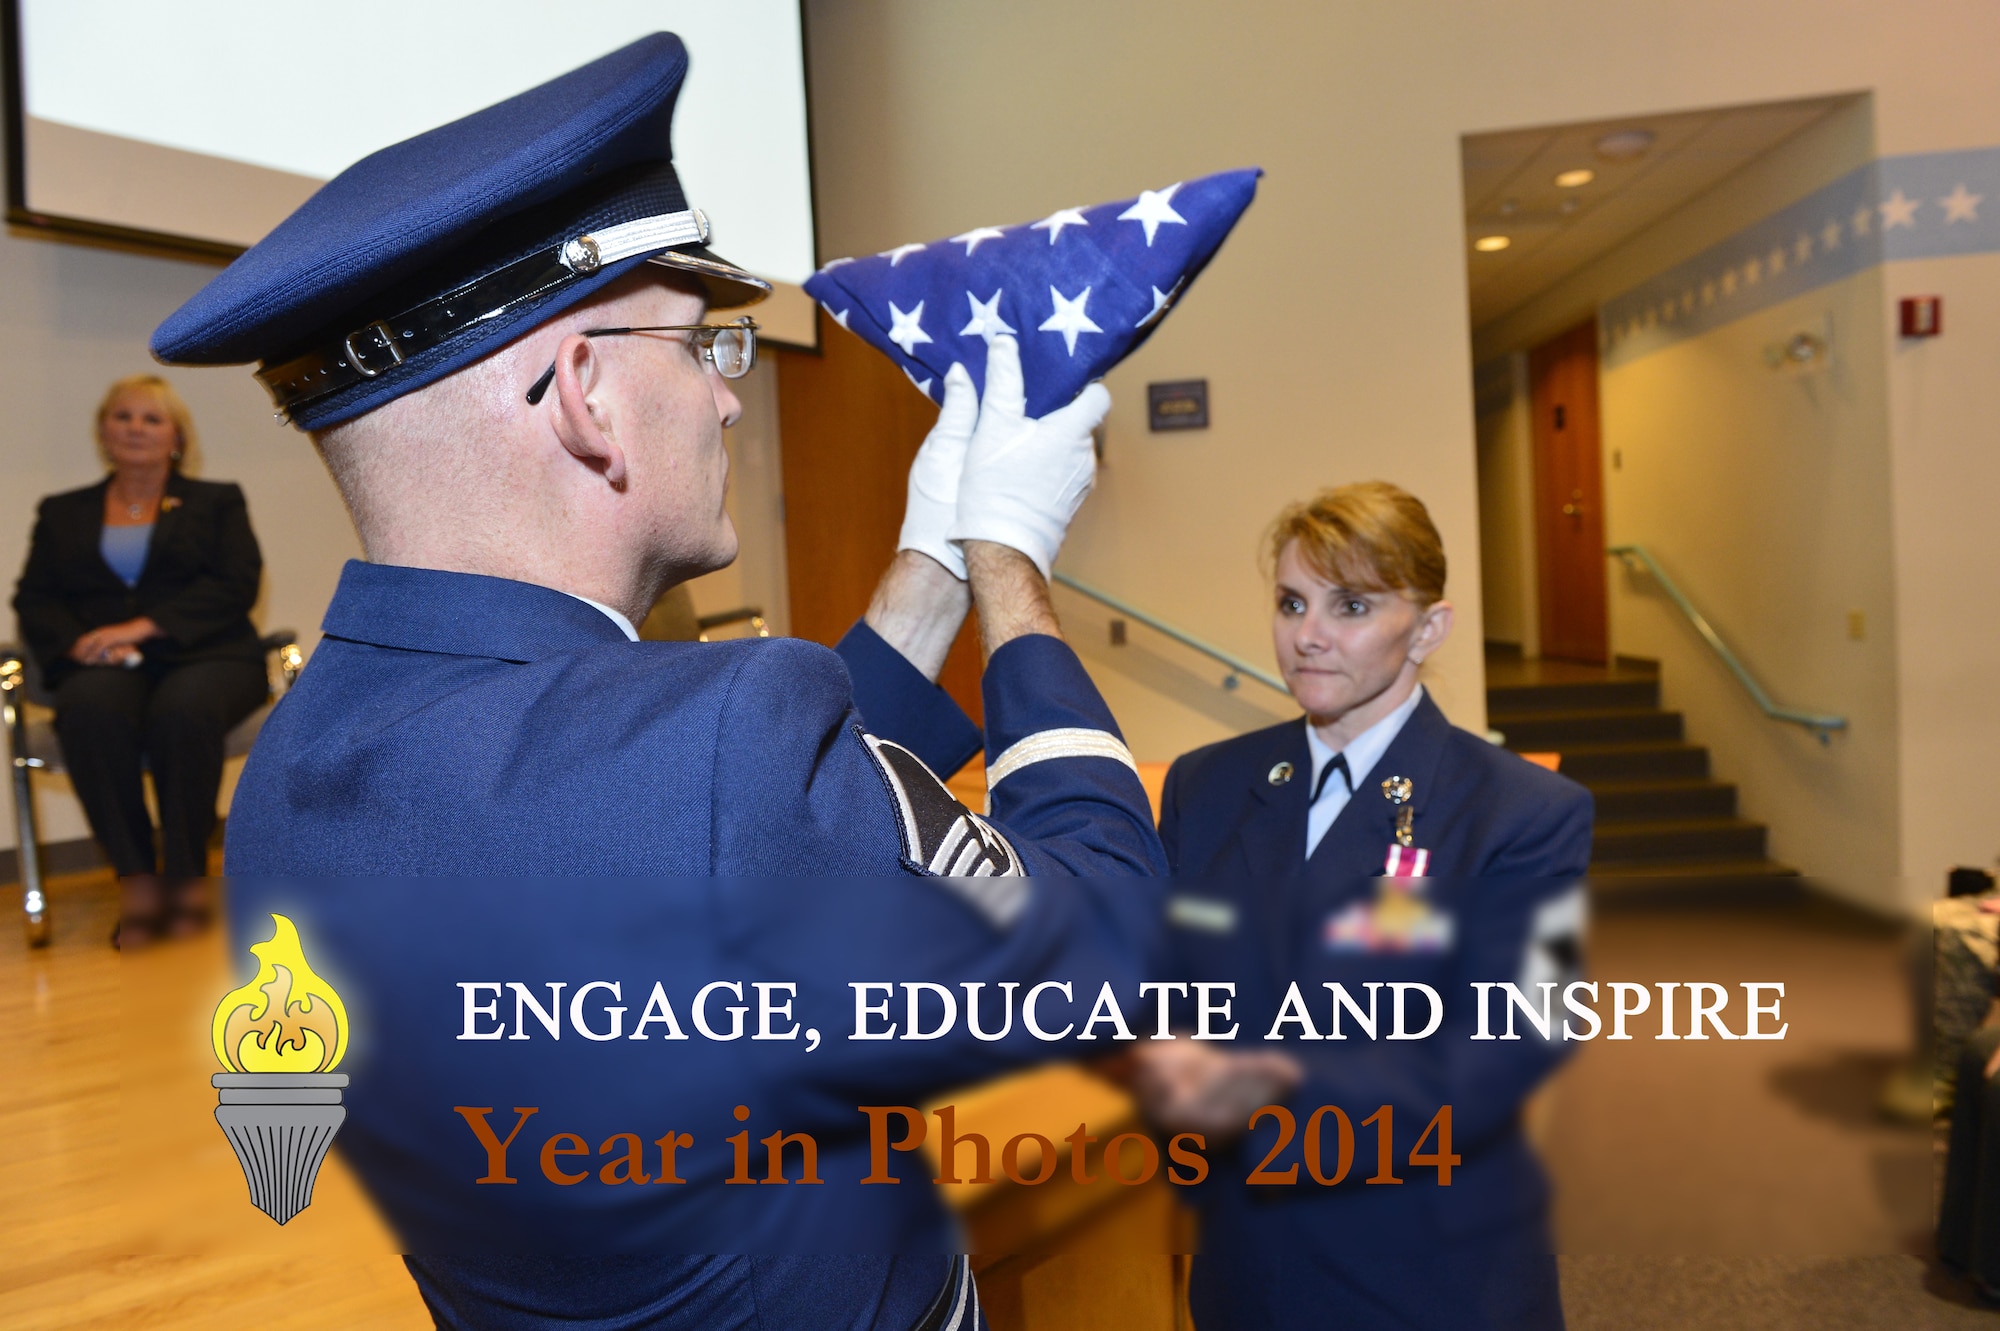 MCGHEE TYSON AIR NATIONAL GUARD BASE, Tenn. - The I.G. Brown Training and Education celebrates 2014 in photos. (U.S. Air National Guard photo illustration by Master Sgt. Mike R. Smith/Released)